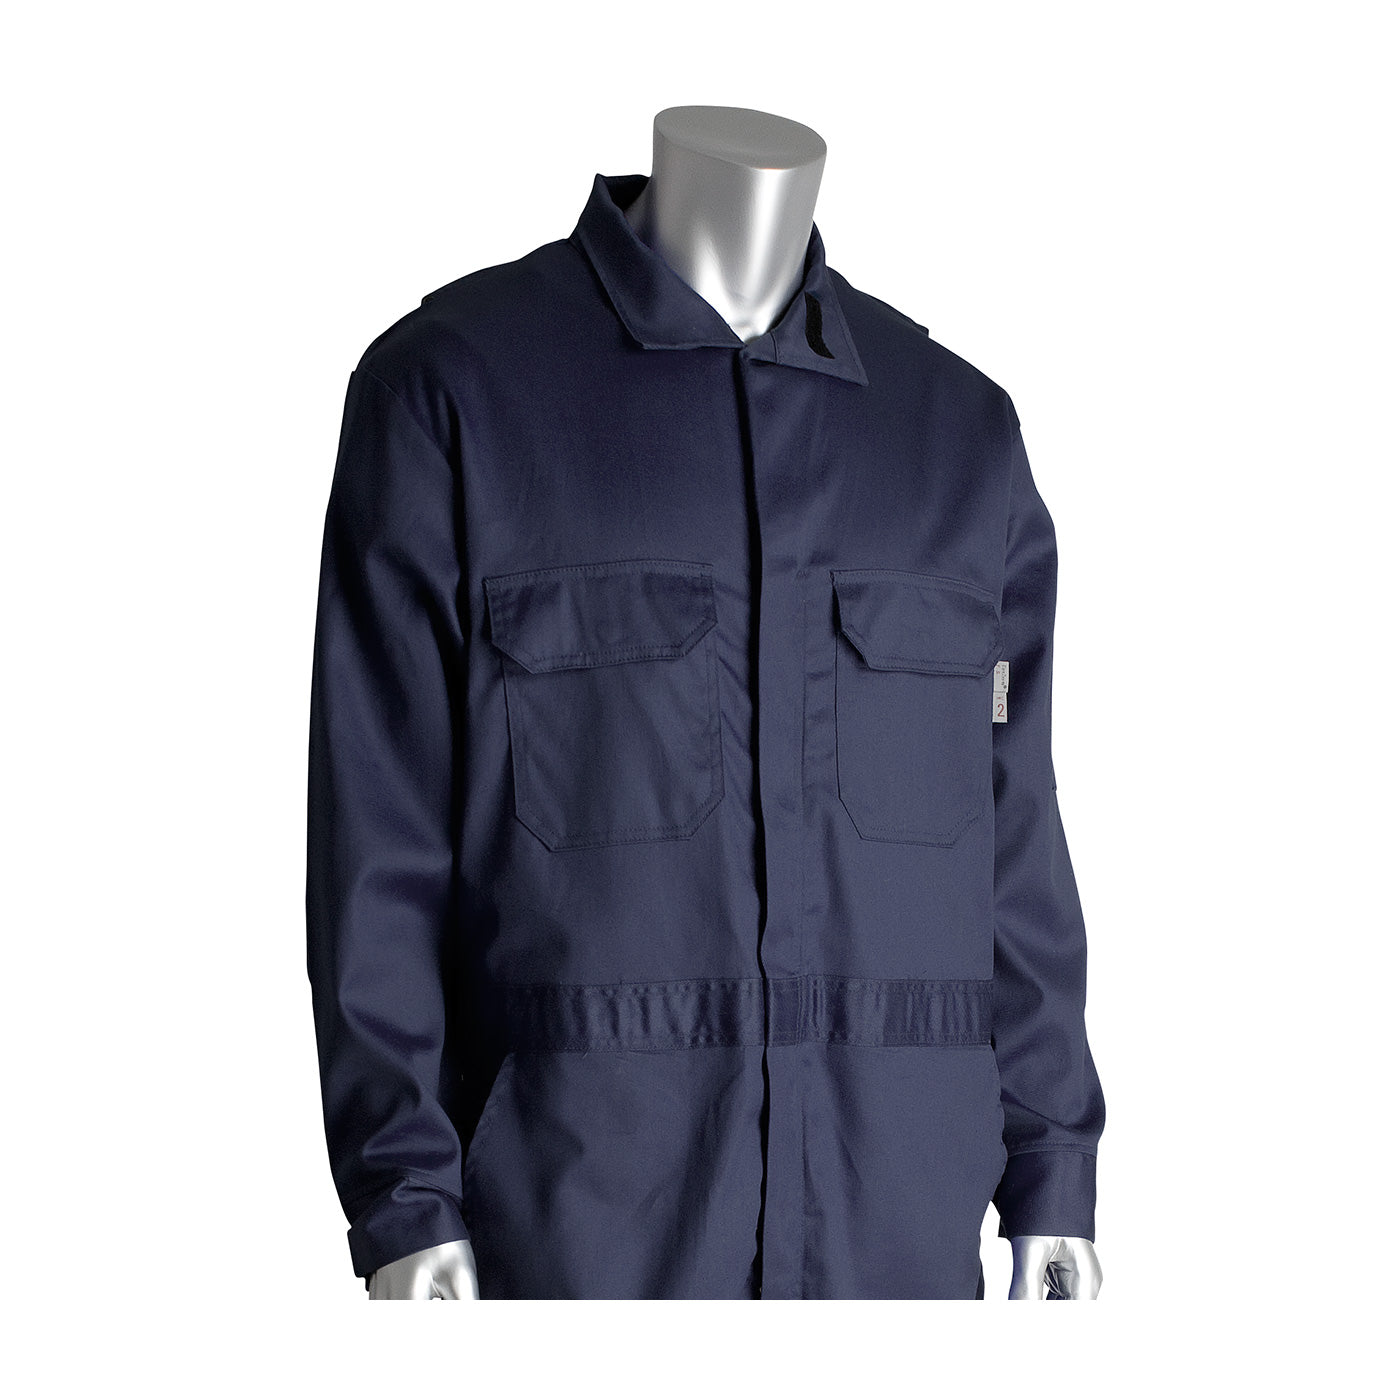 PIP 385-FRSC-NV/M AR/FR Dual Certified Coverall with Zipper Closure - 9.2 Cal/cm2